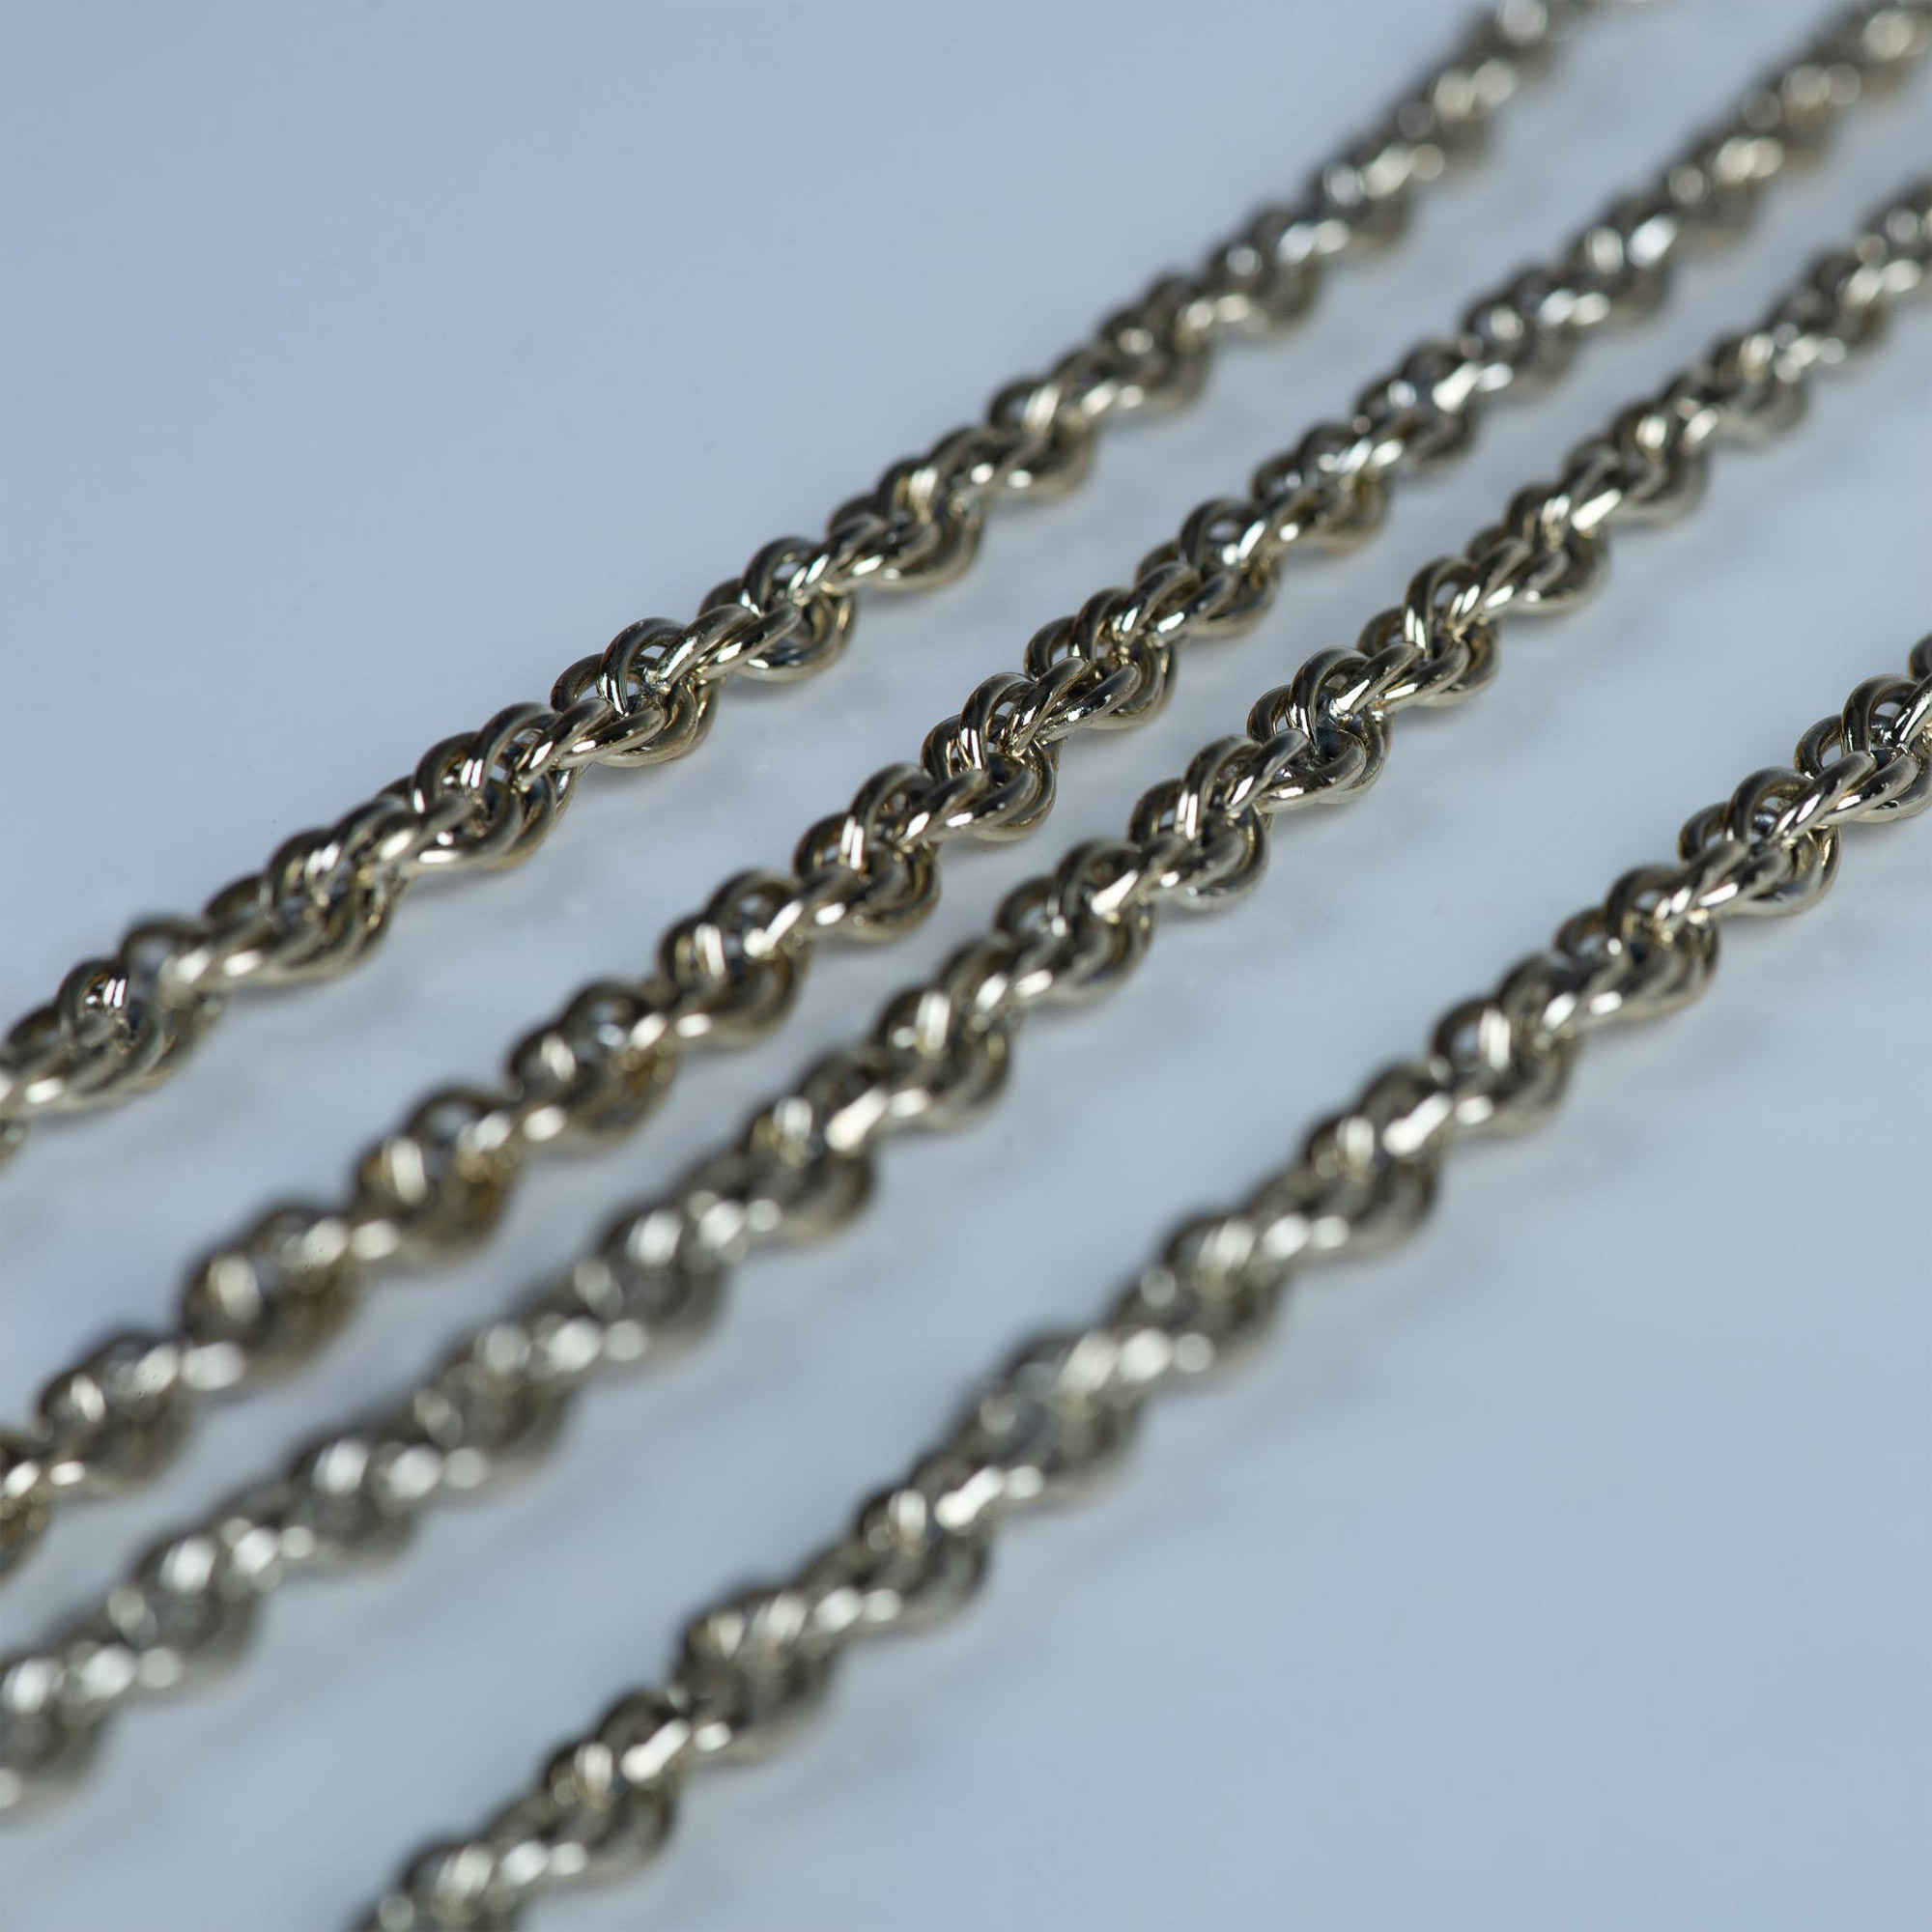 Long Twisted Gold Metal Chain - Image 4 of 6